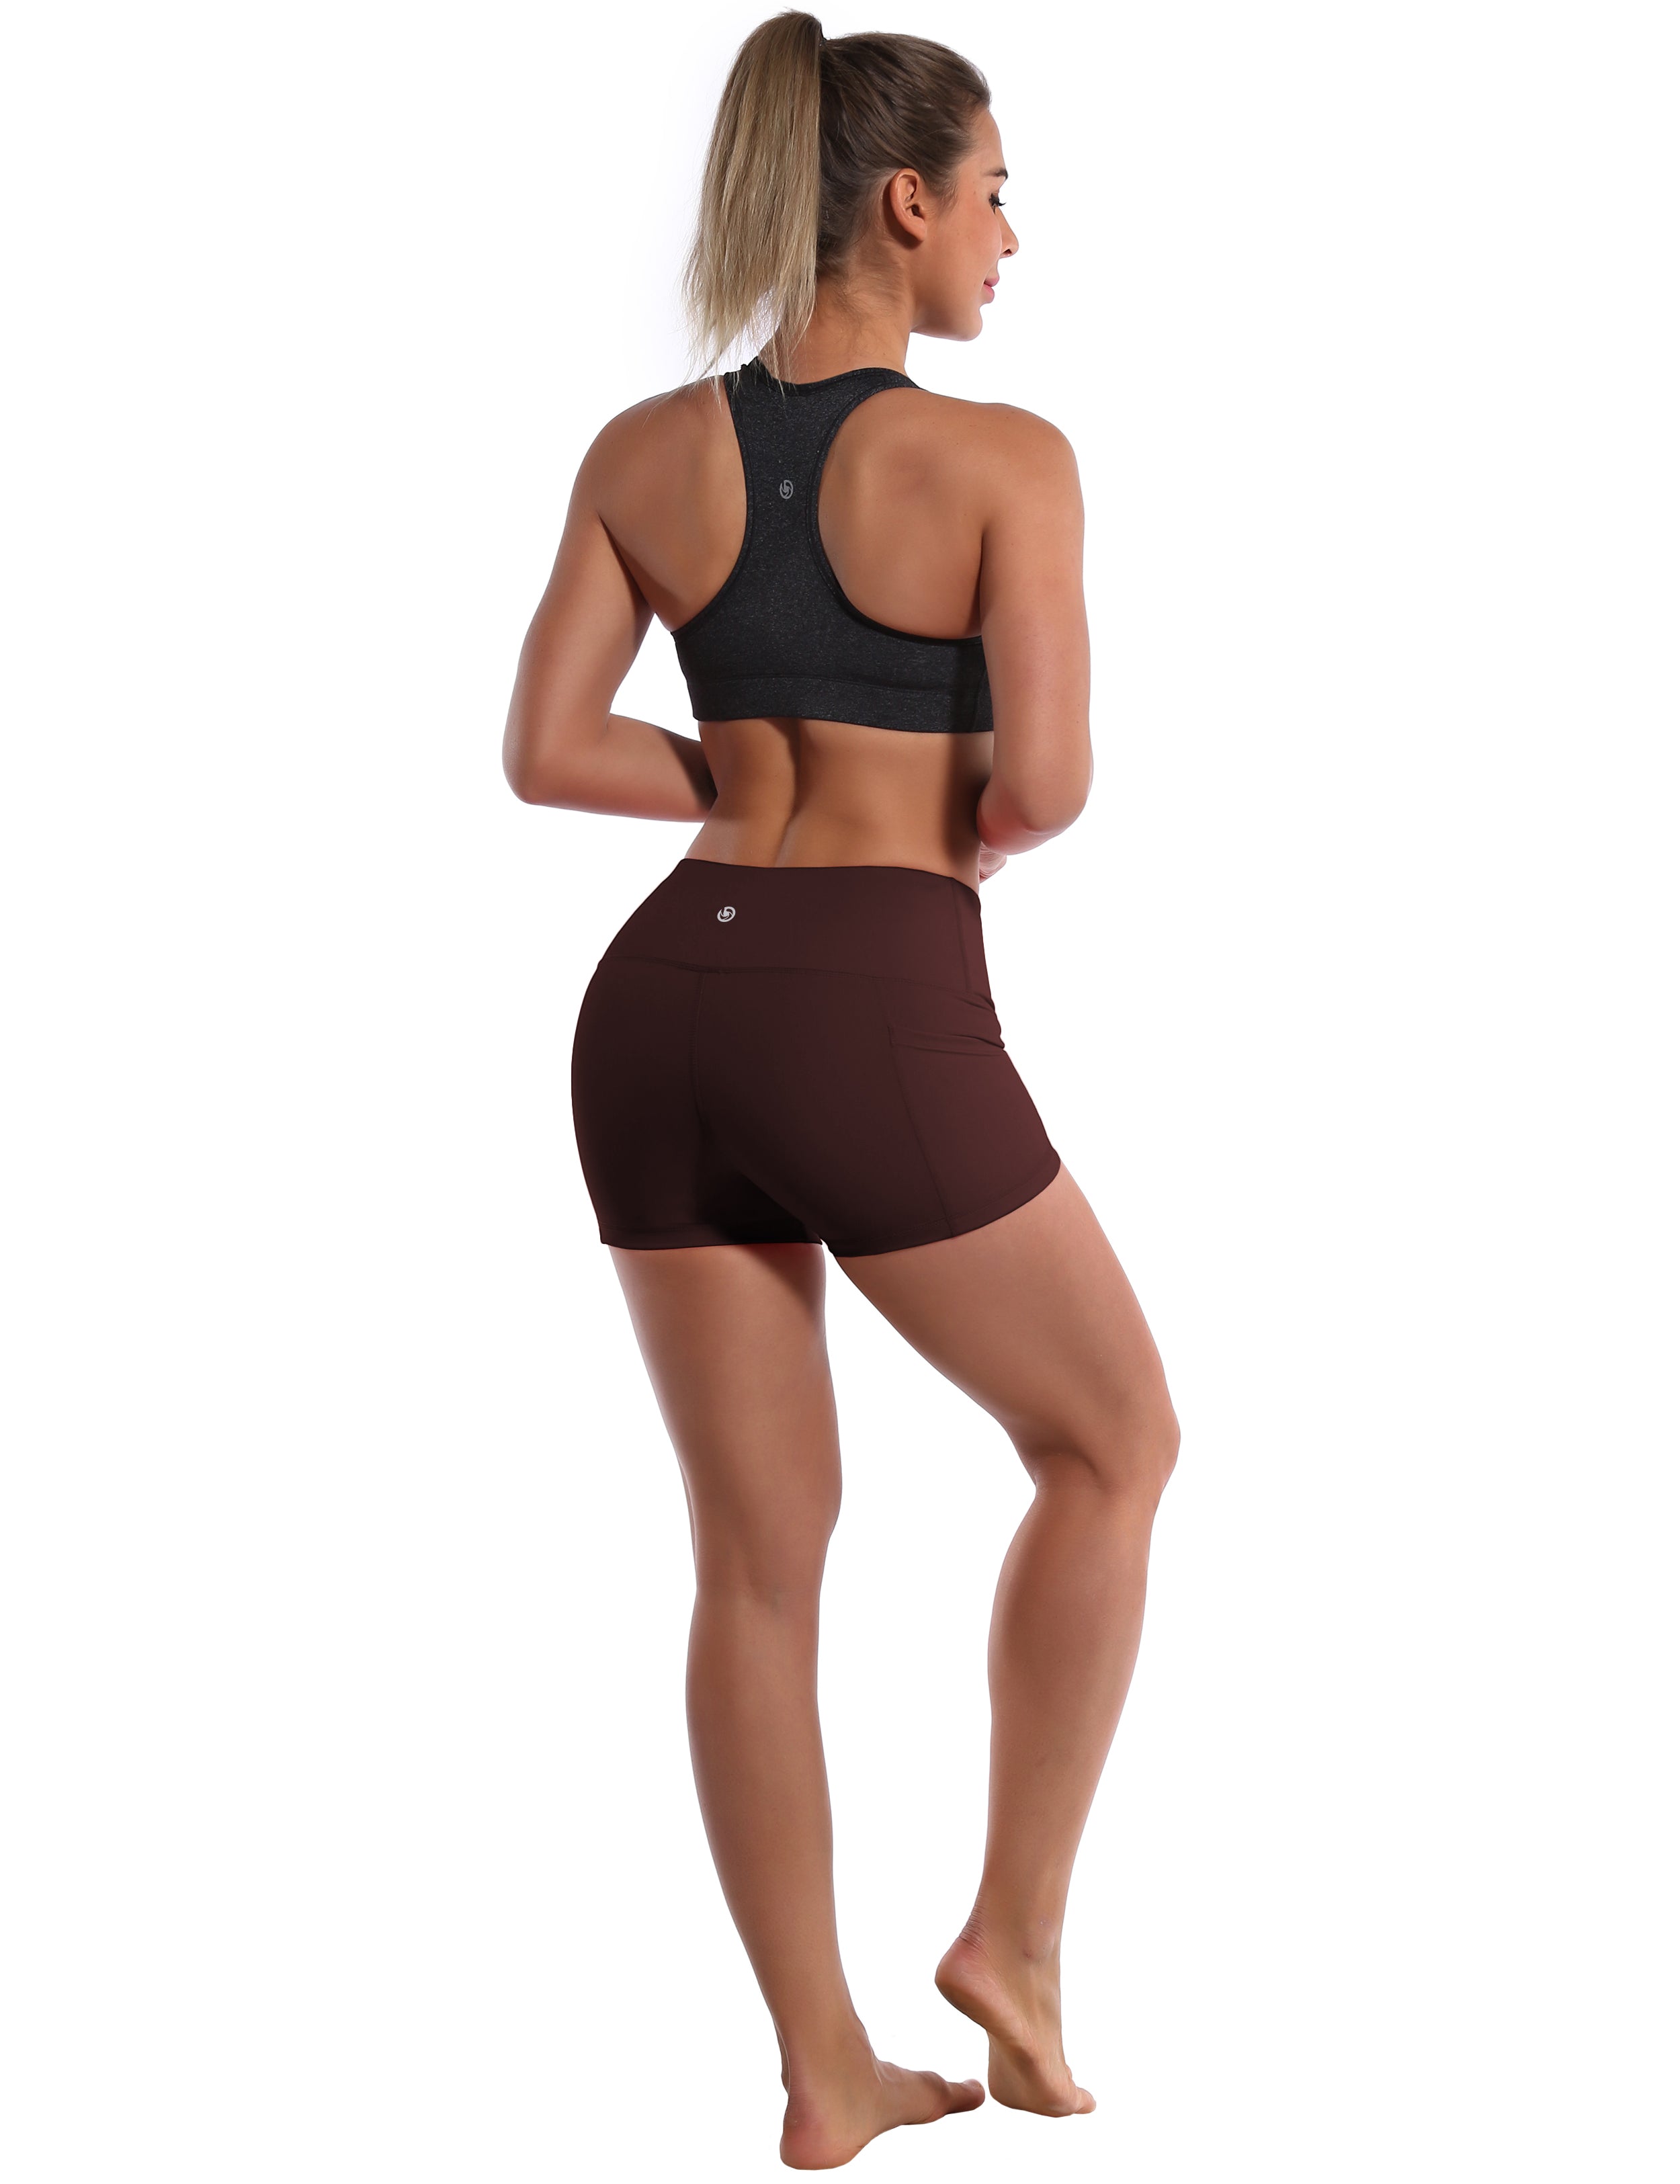 2.5" Side Pockets Yoga Shorts mahoganymaroon Sleek, soft, smooth and totally comfortable: our newest sexy style is here. Softest-ever fabric High elasticity High density 4-way stretch Fabric doesn't attract lint easily No see-through Moisture-wicking Machine wash 78% Polyester, 22% Spandex